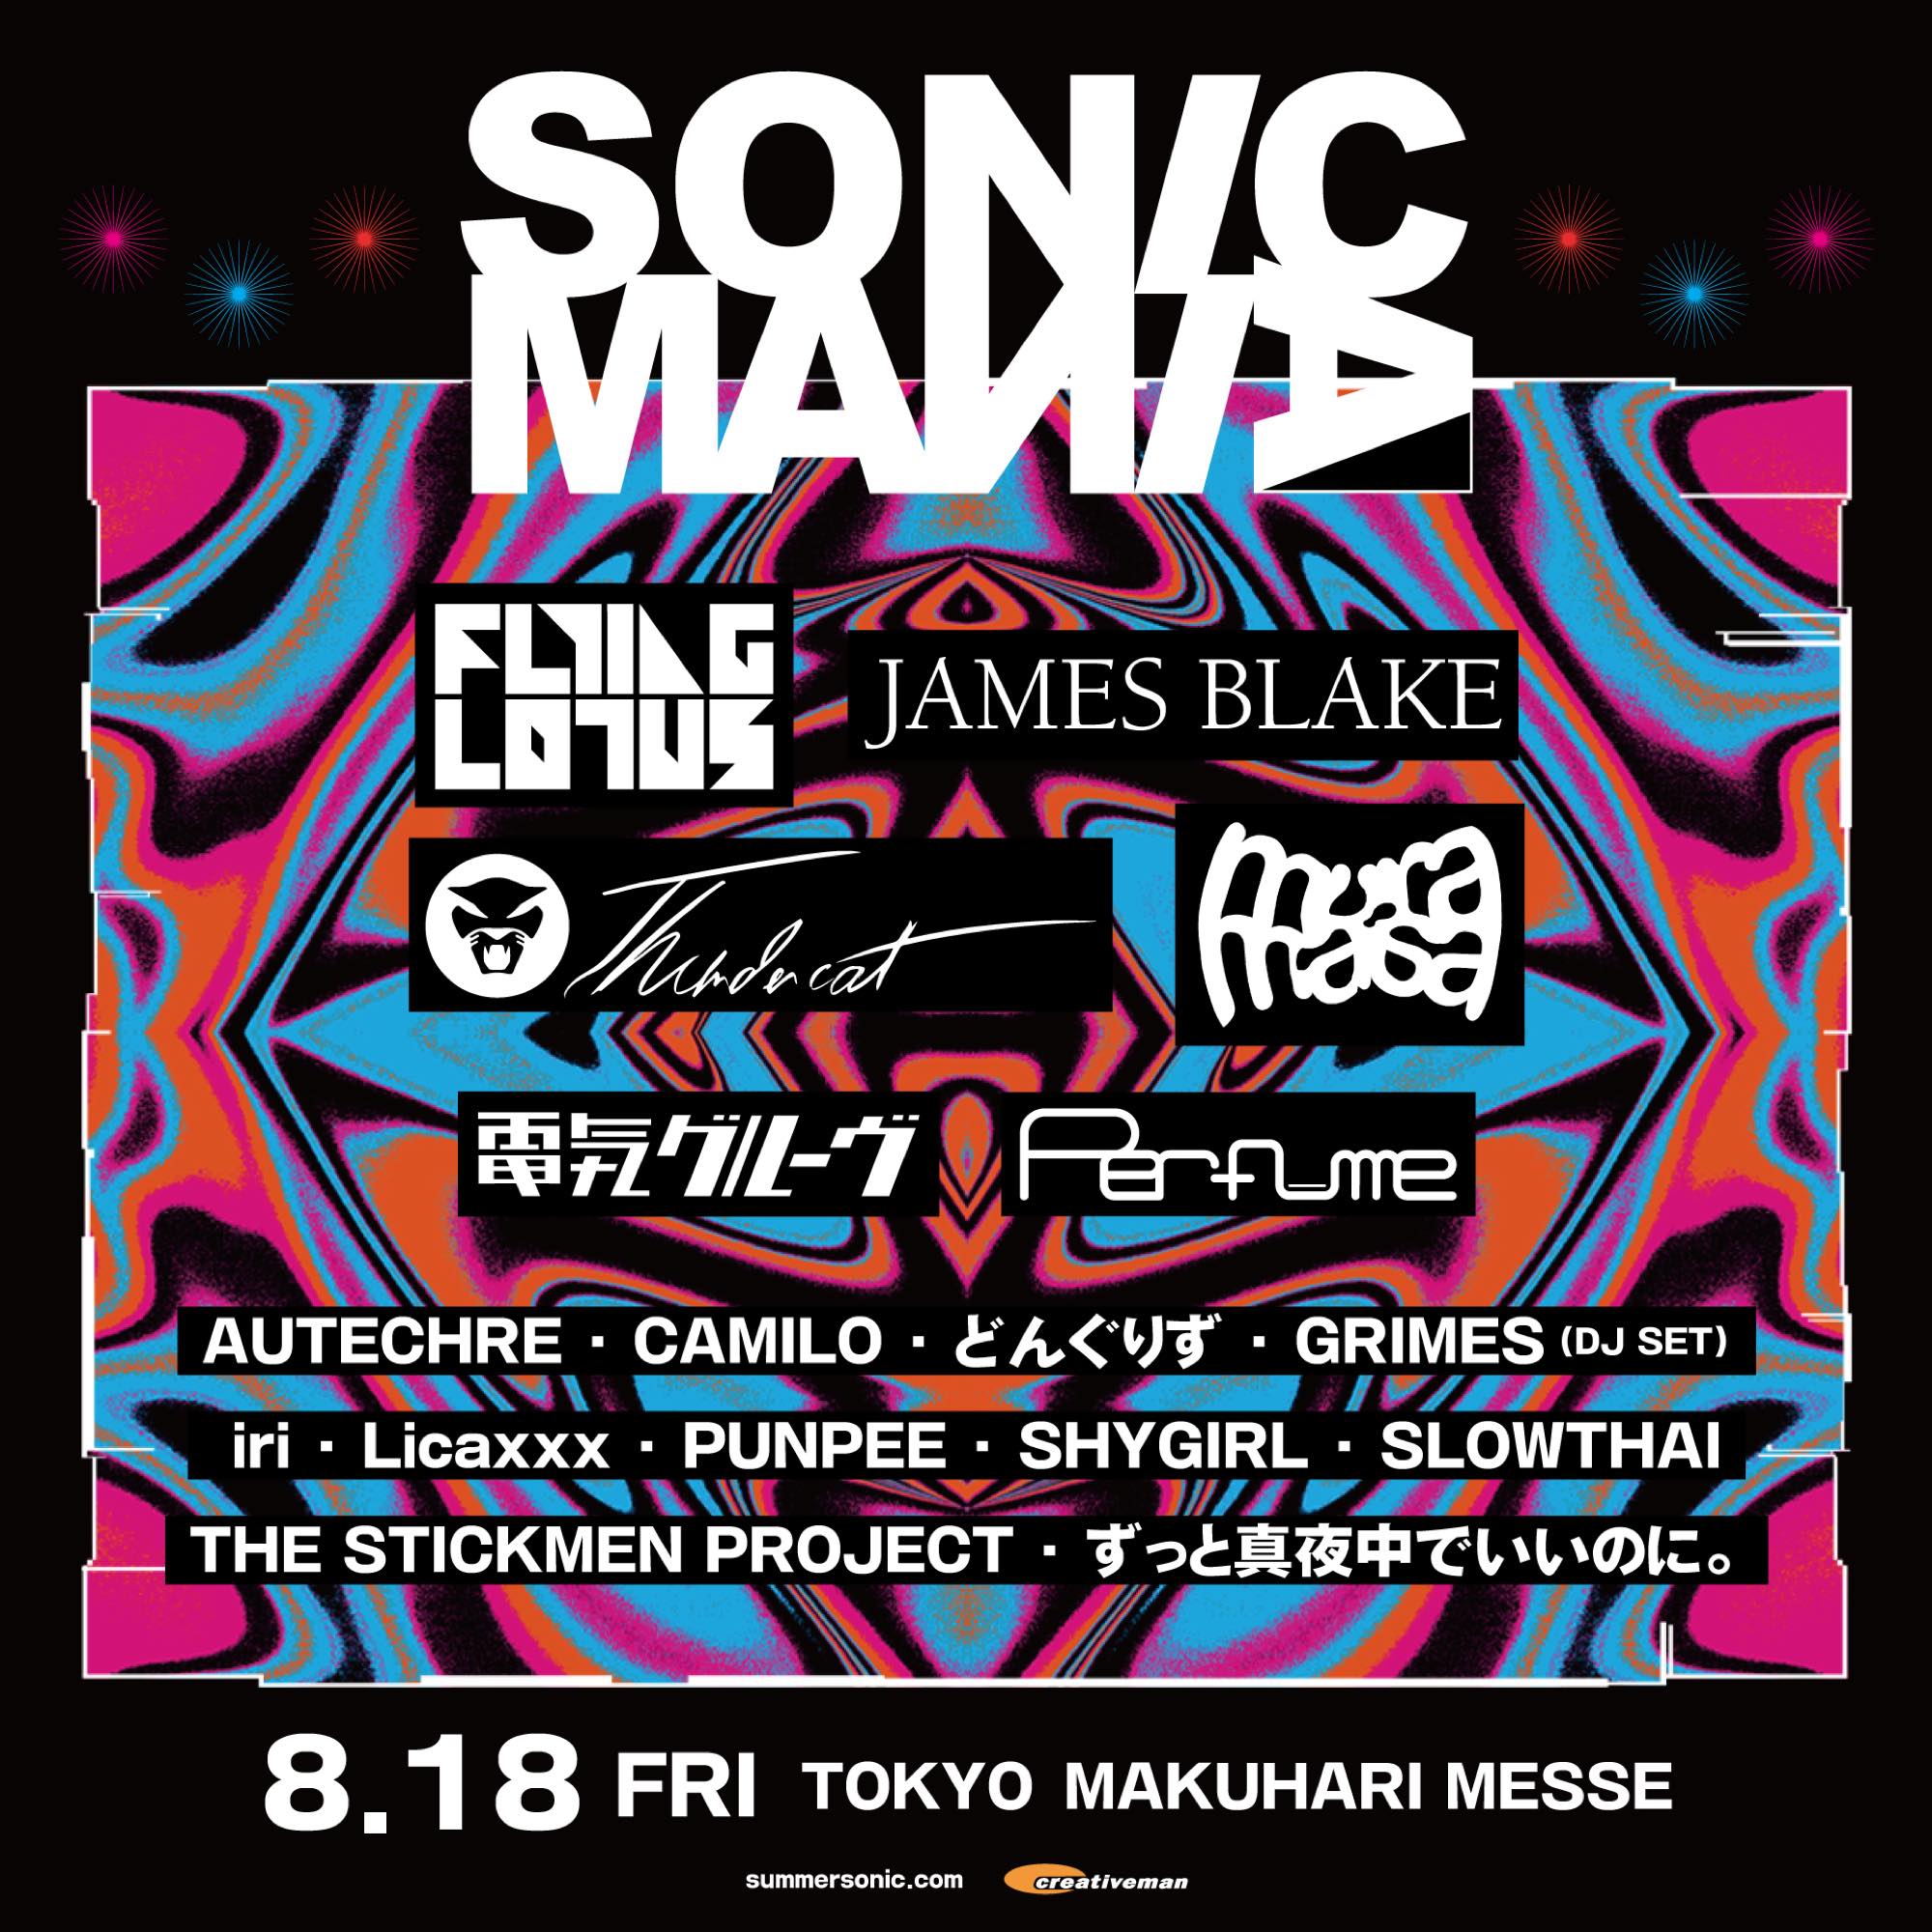 TICKETS NOW ON SALE | NEWS | SONICMANIA Official Site